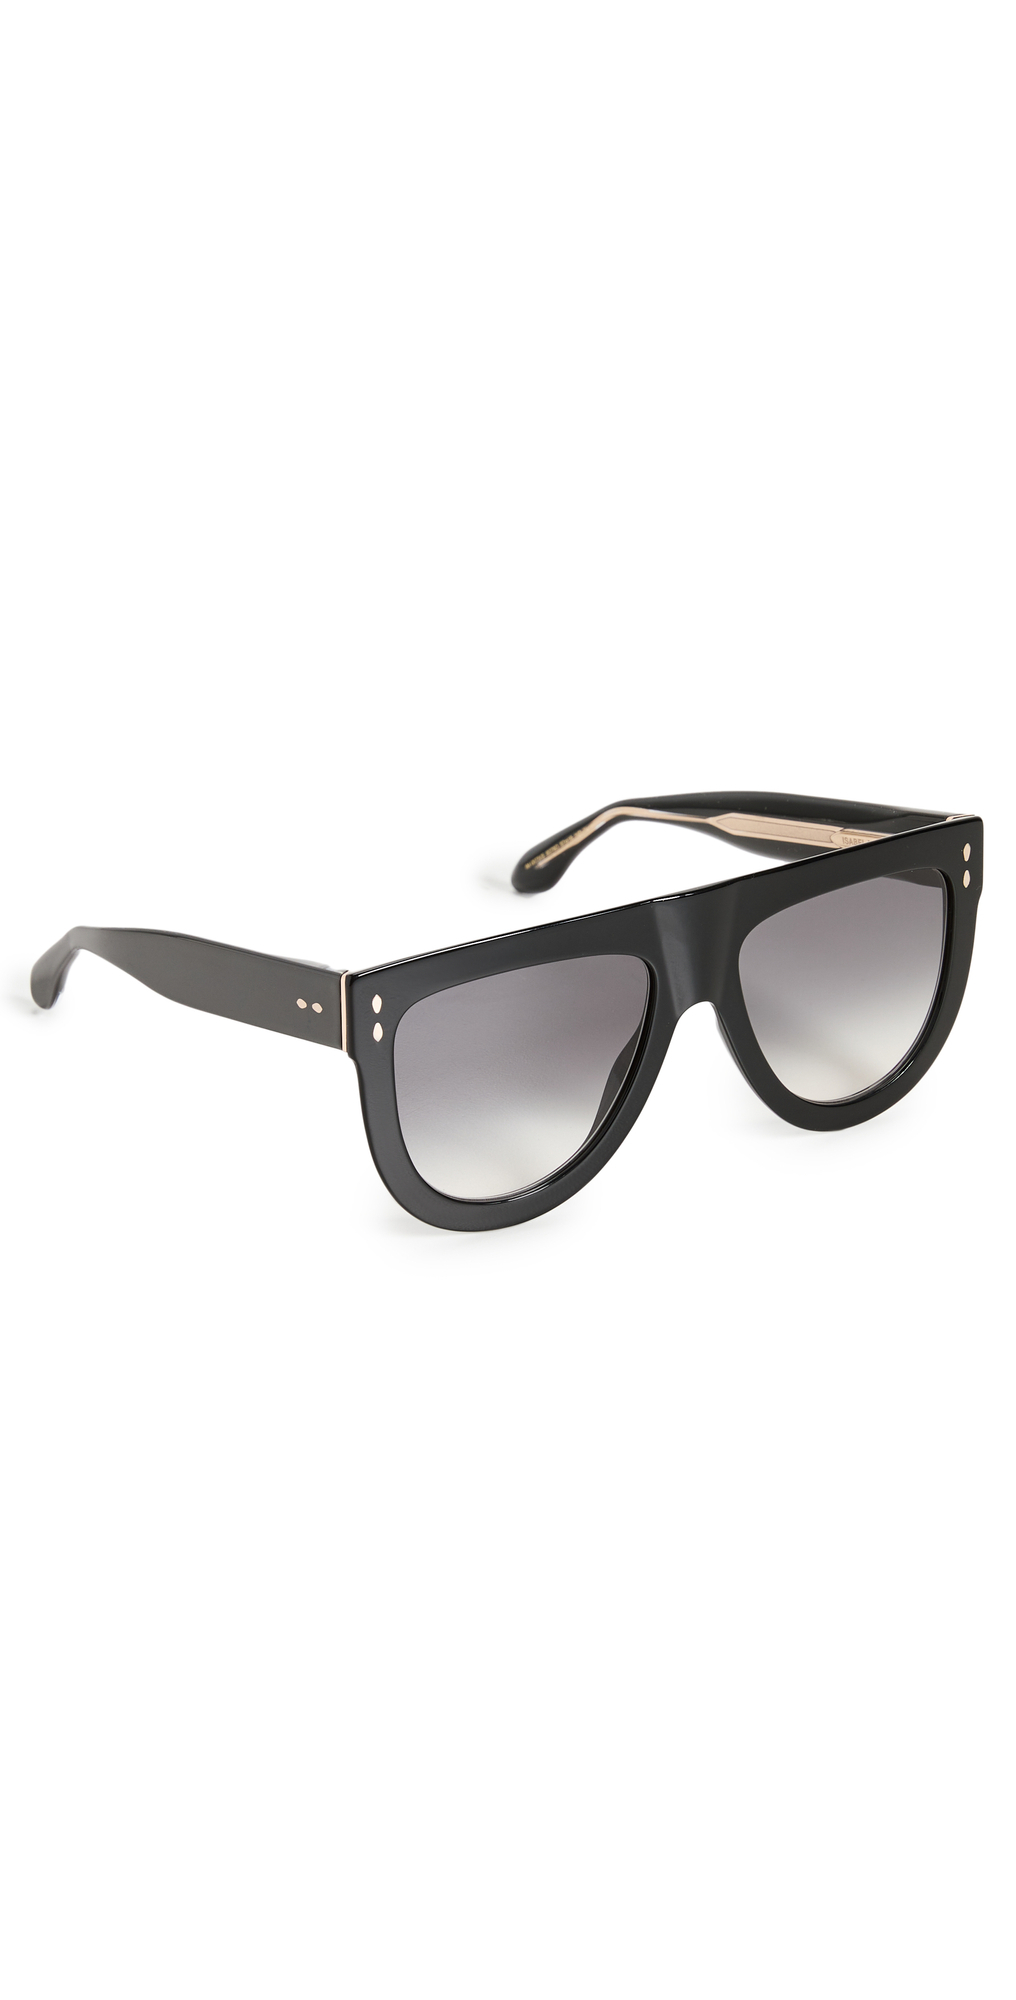 Isabel Marant Rounded Flat Top Sunglasses in black